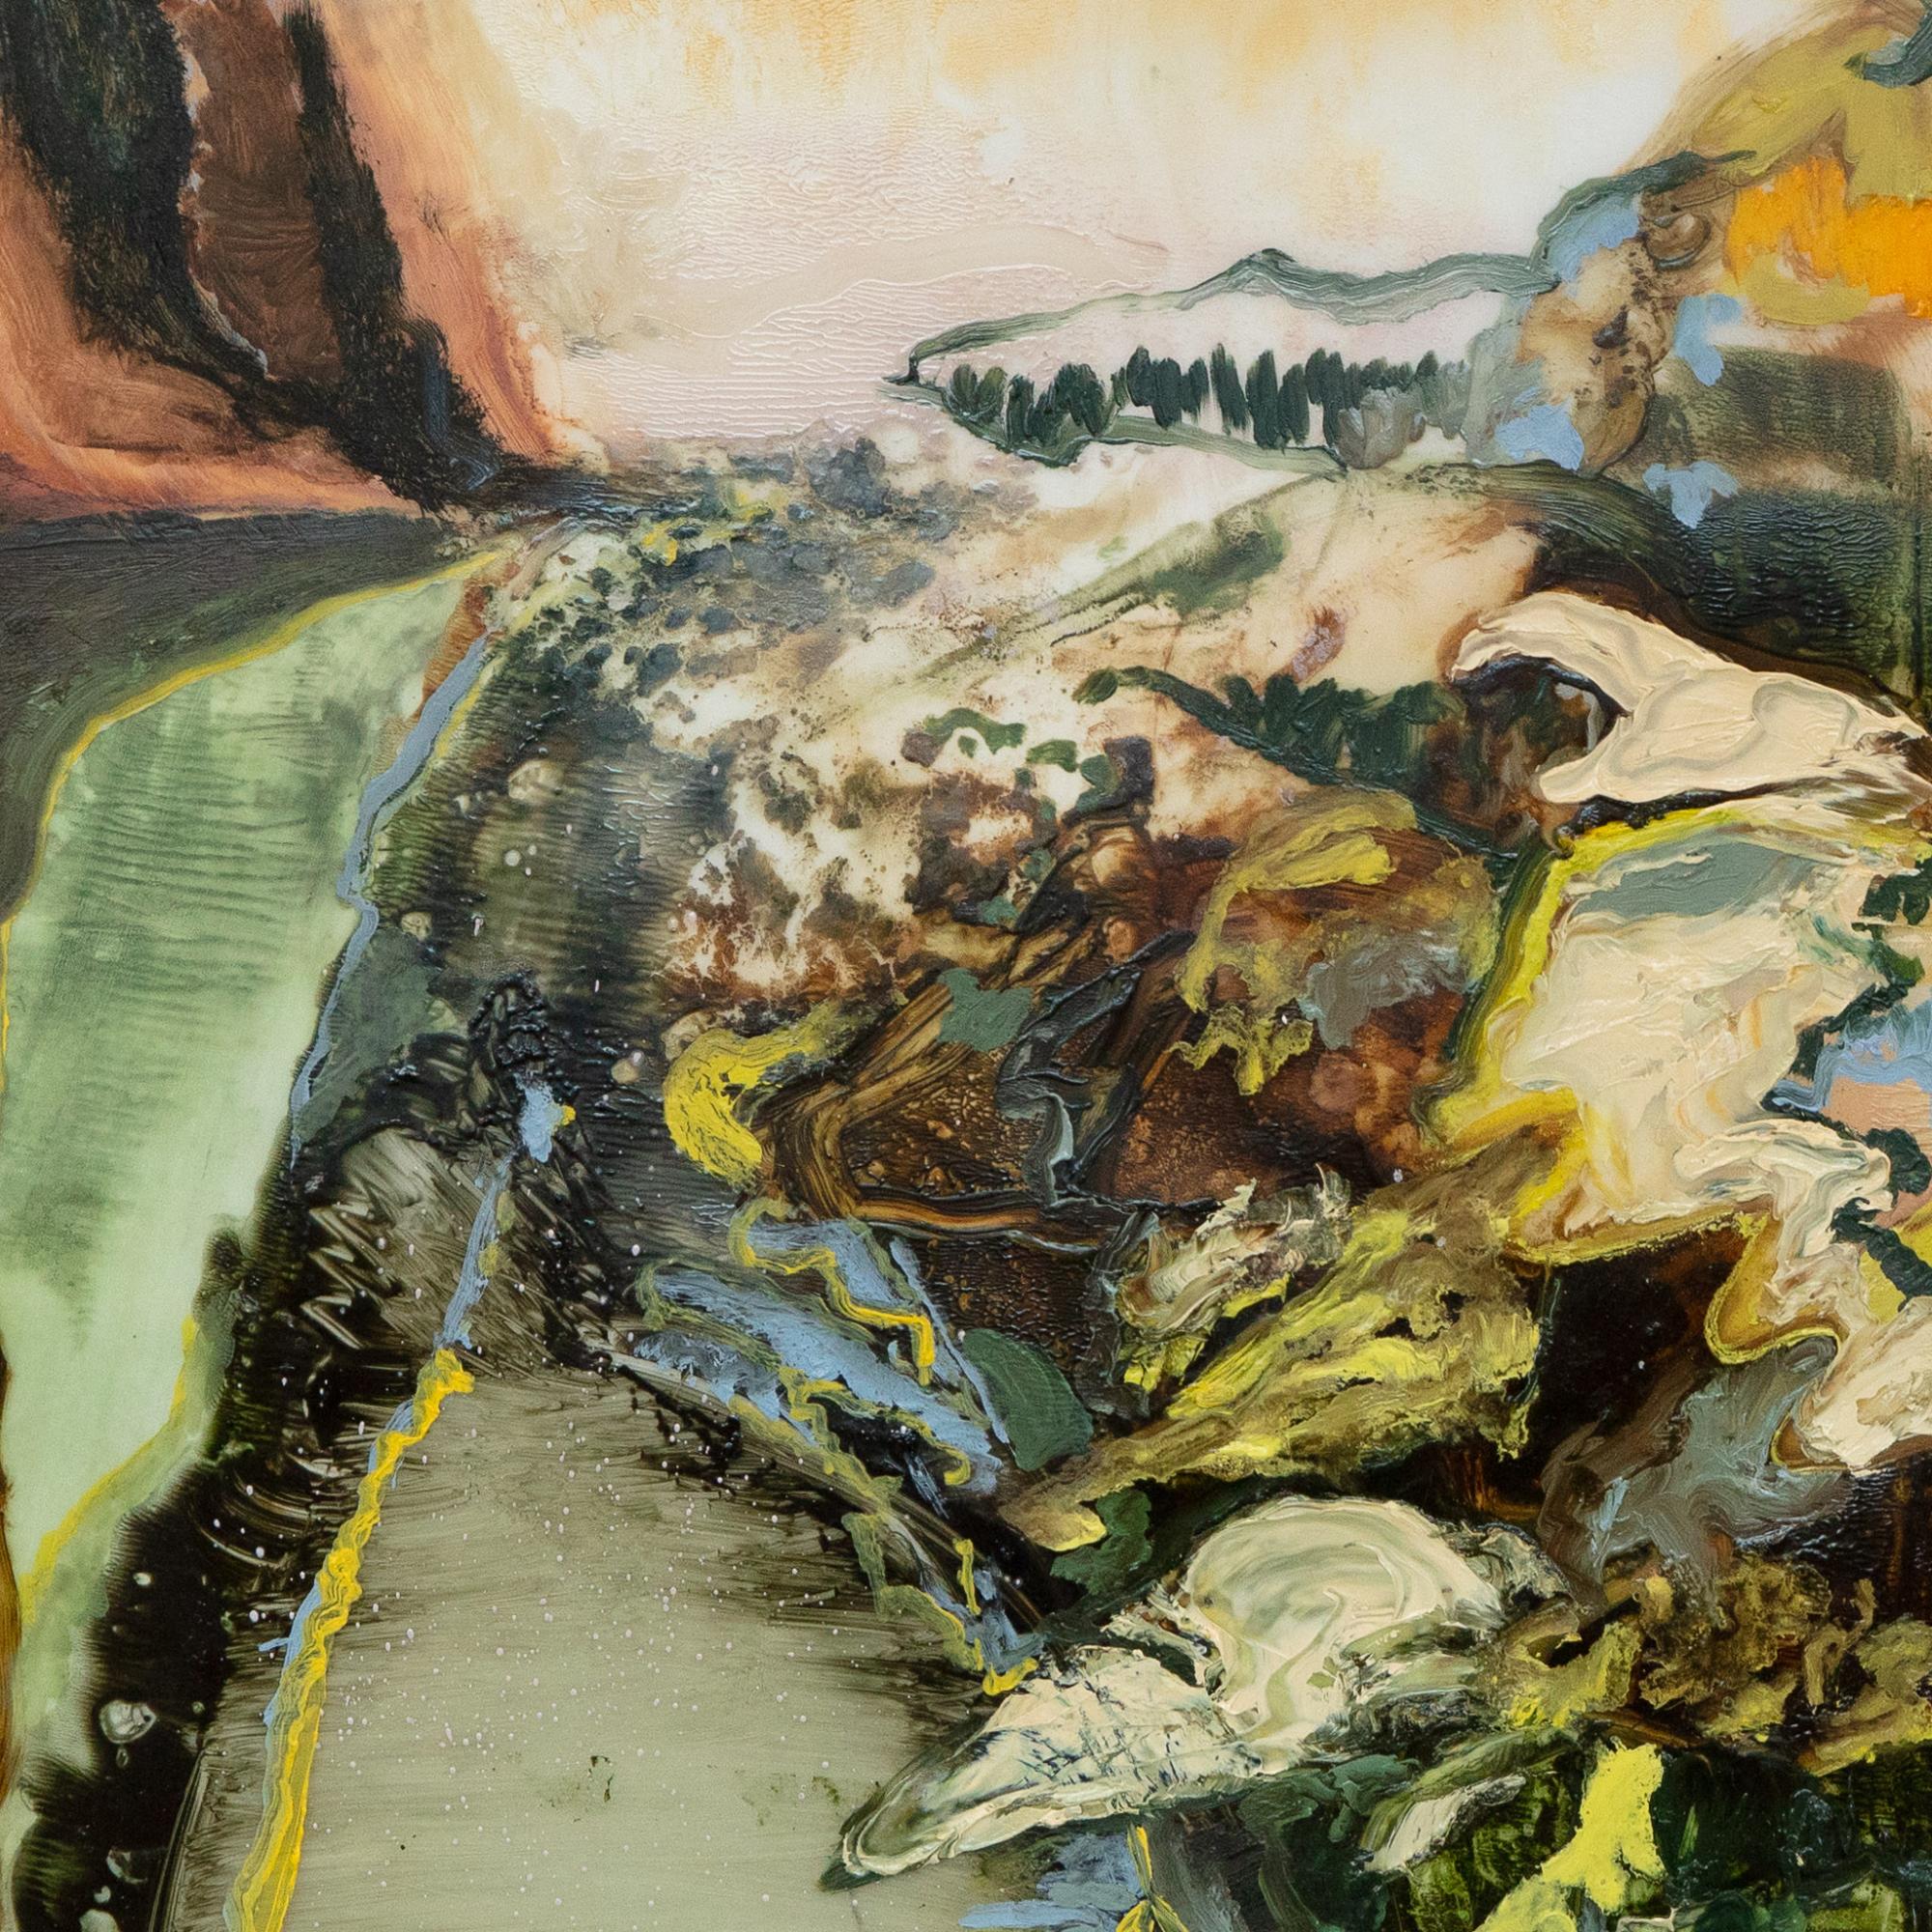 Close-up view of abstracted landscape painting. Colours consist of predominantly darker shades, in blue, green and brown. There are also section of thickly applied paint in yellow and cream.